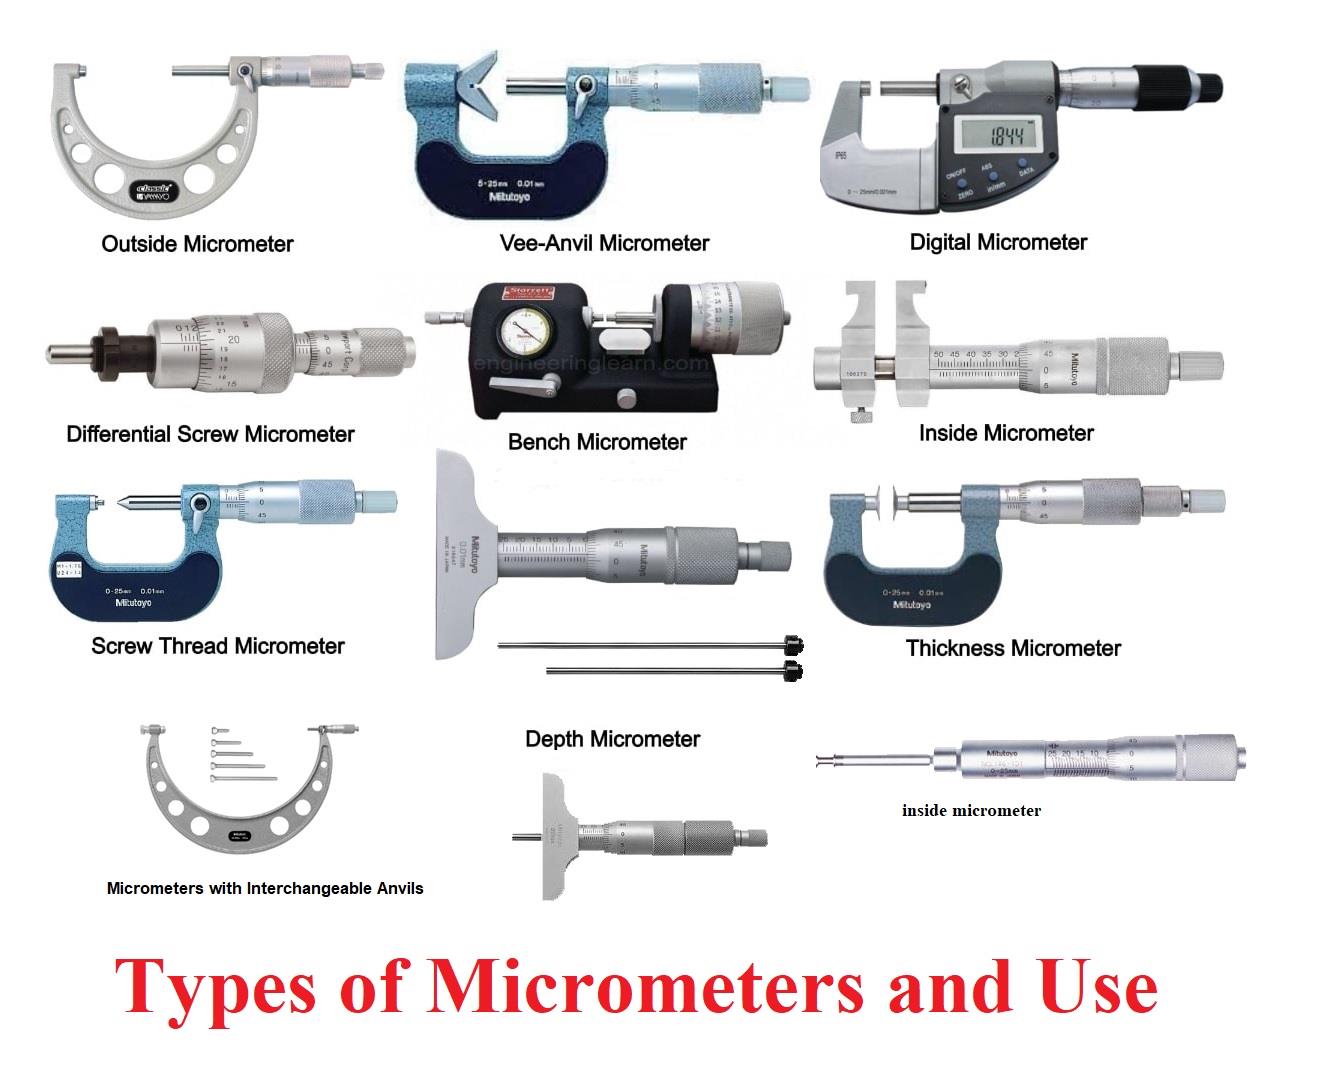 Types of Micrometers and their uses